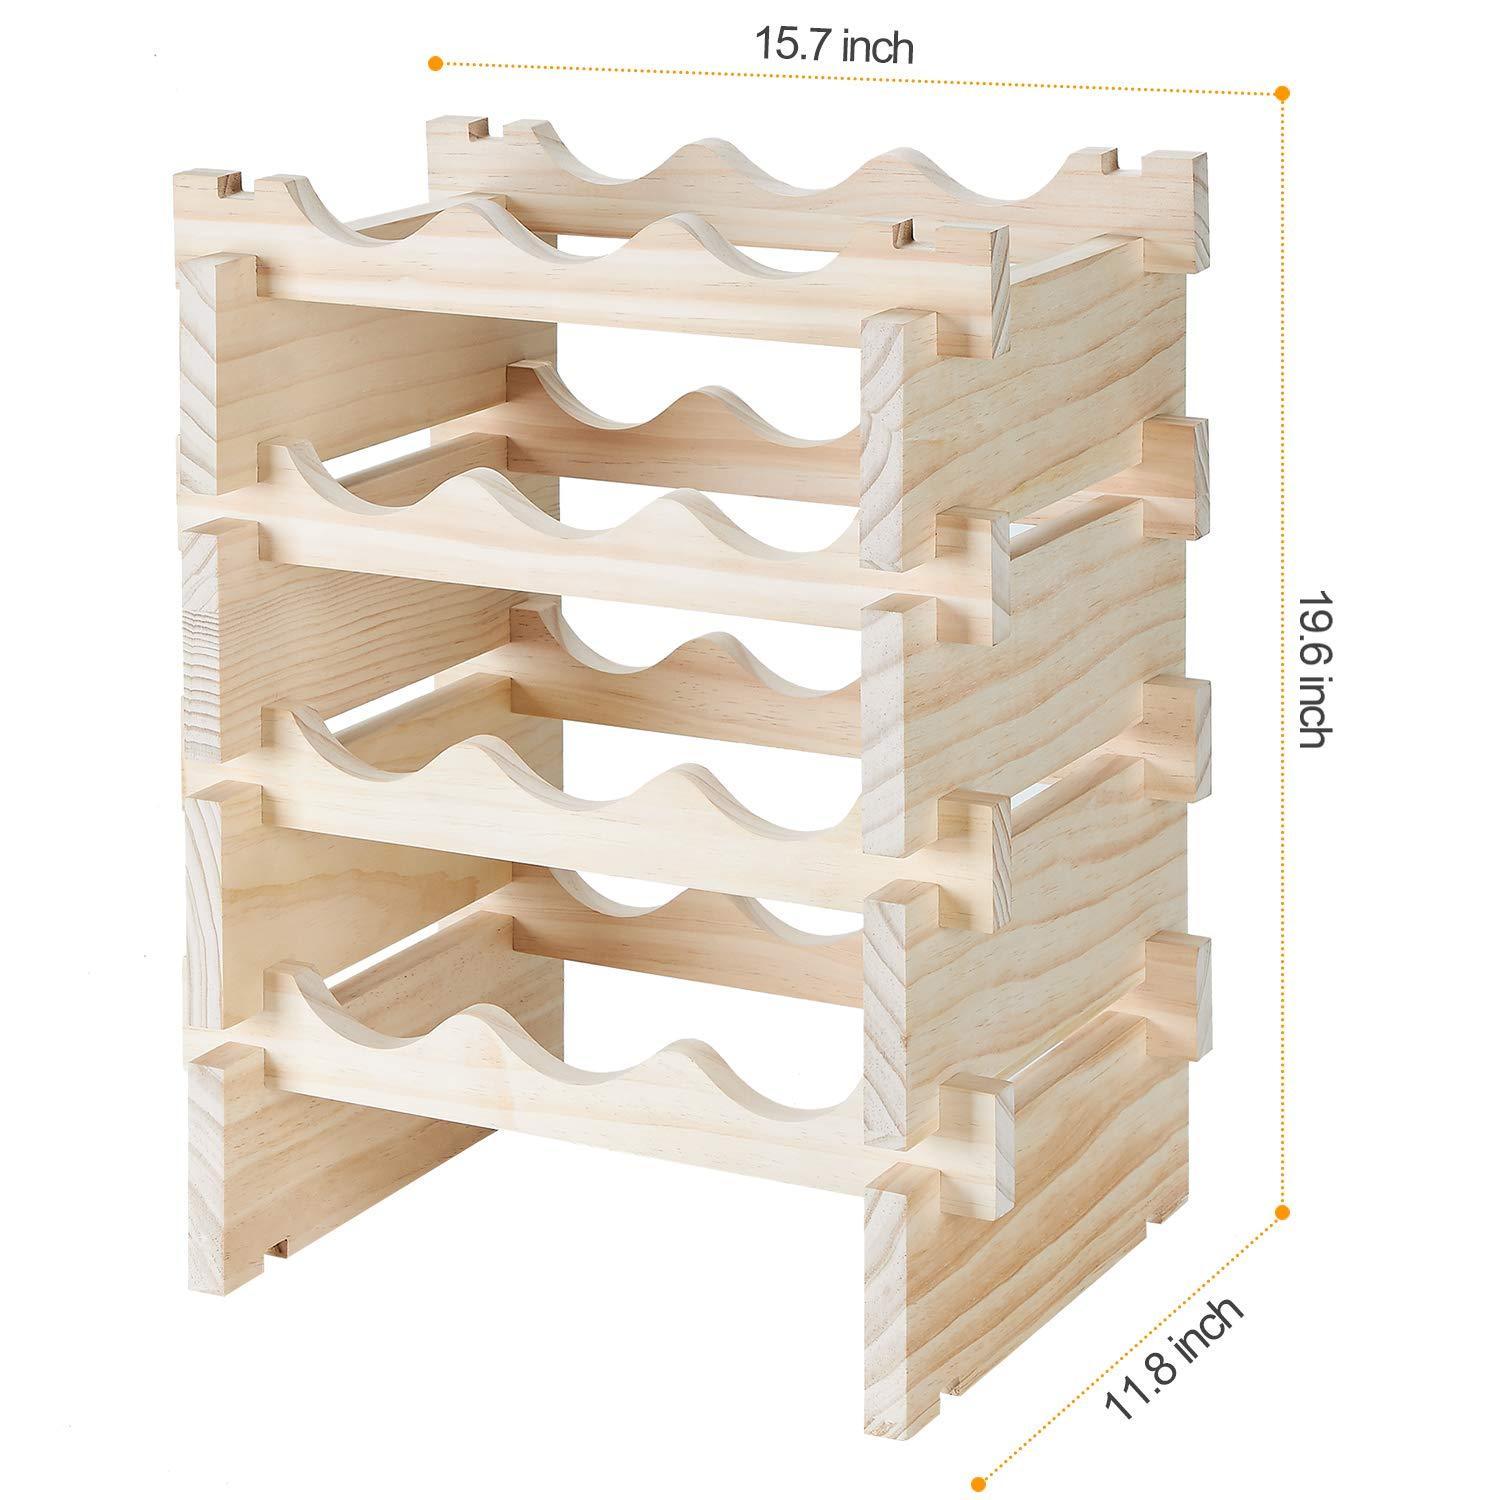 New defway wood wine rack countertop stackable storage wine holder 12 bottle display free standing natural wooden shelf for bar kitchen 4 tier natural wood